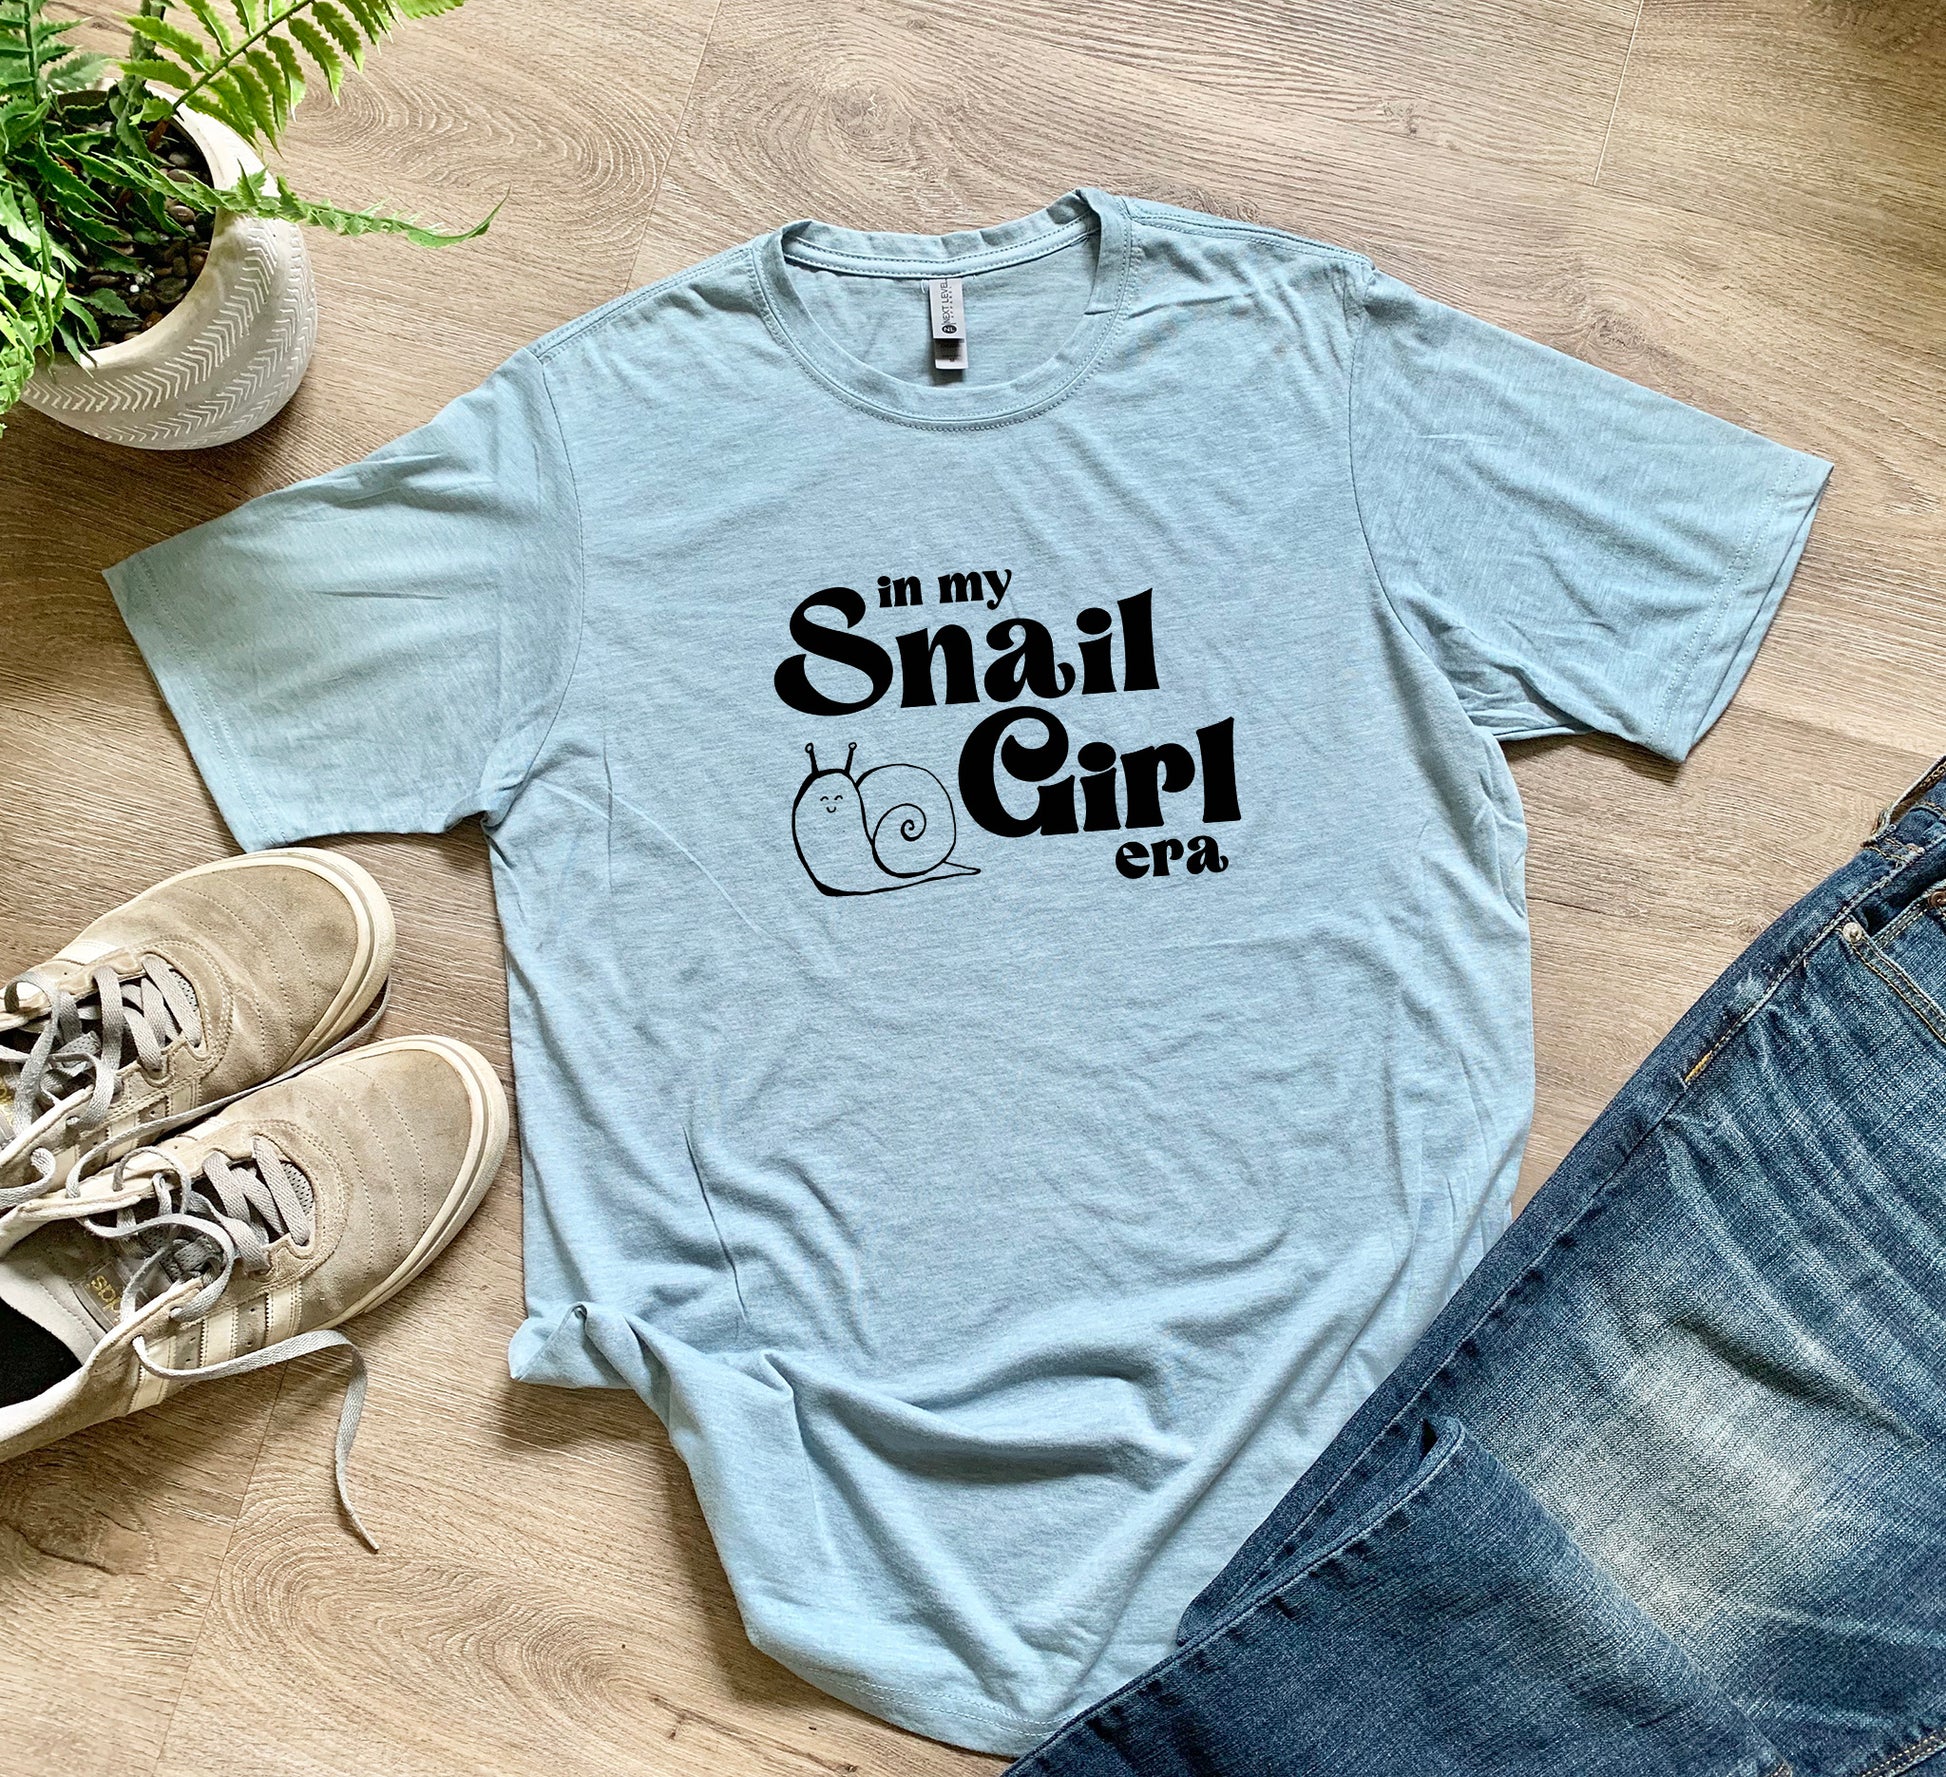 a t - shirt that says i'm my snail girl on it